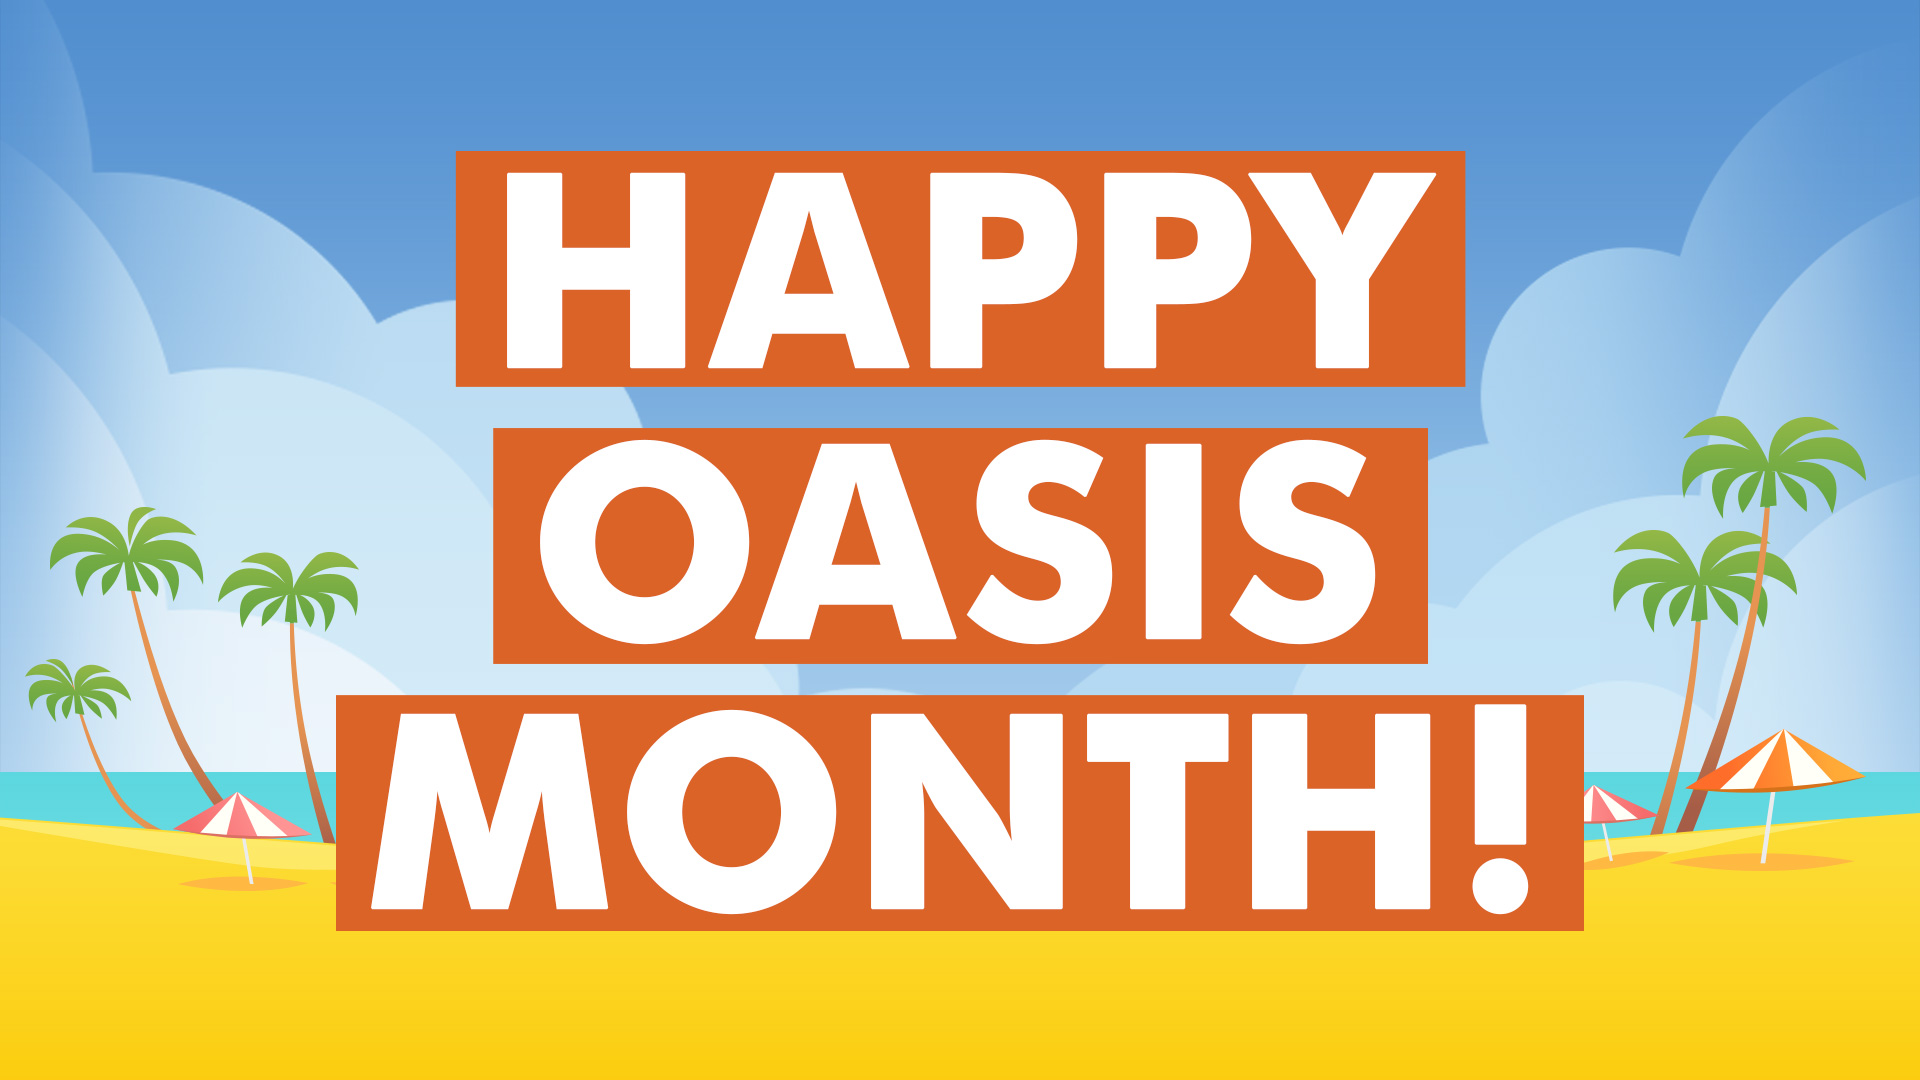 Happy Oasis Month!